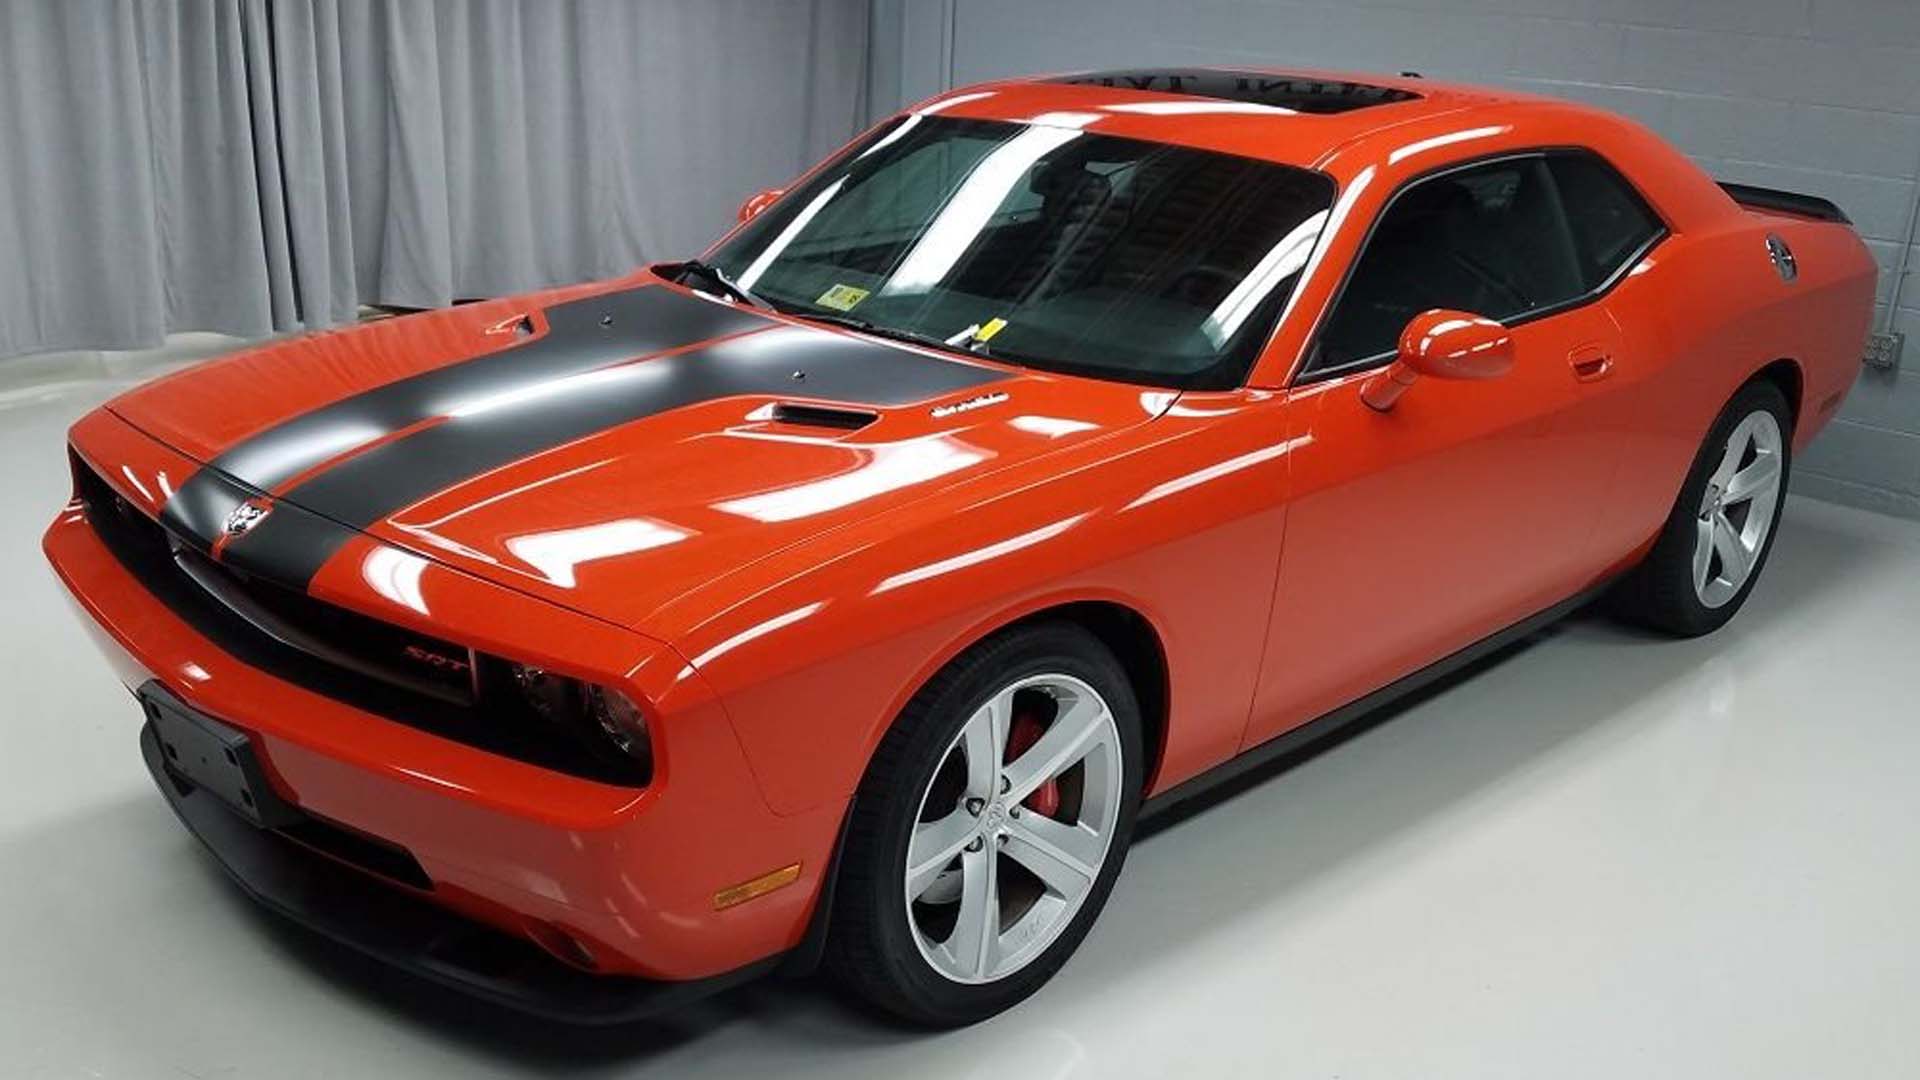 One-Owner 2008 Dodge Challenger SRT8 Is A True Collectible